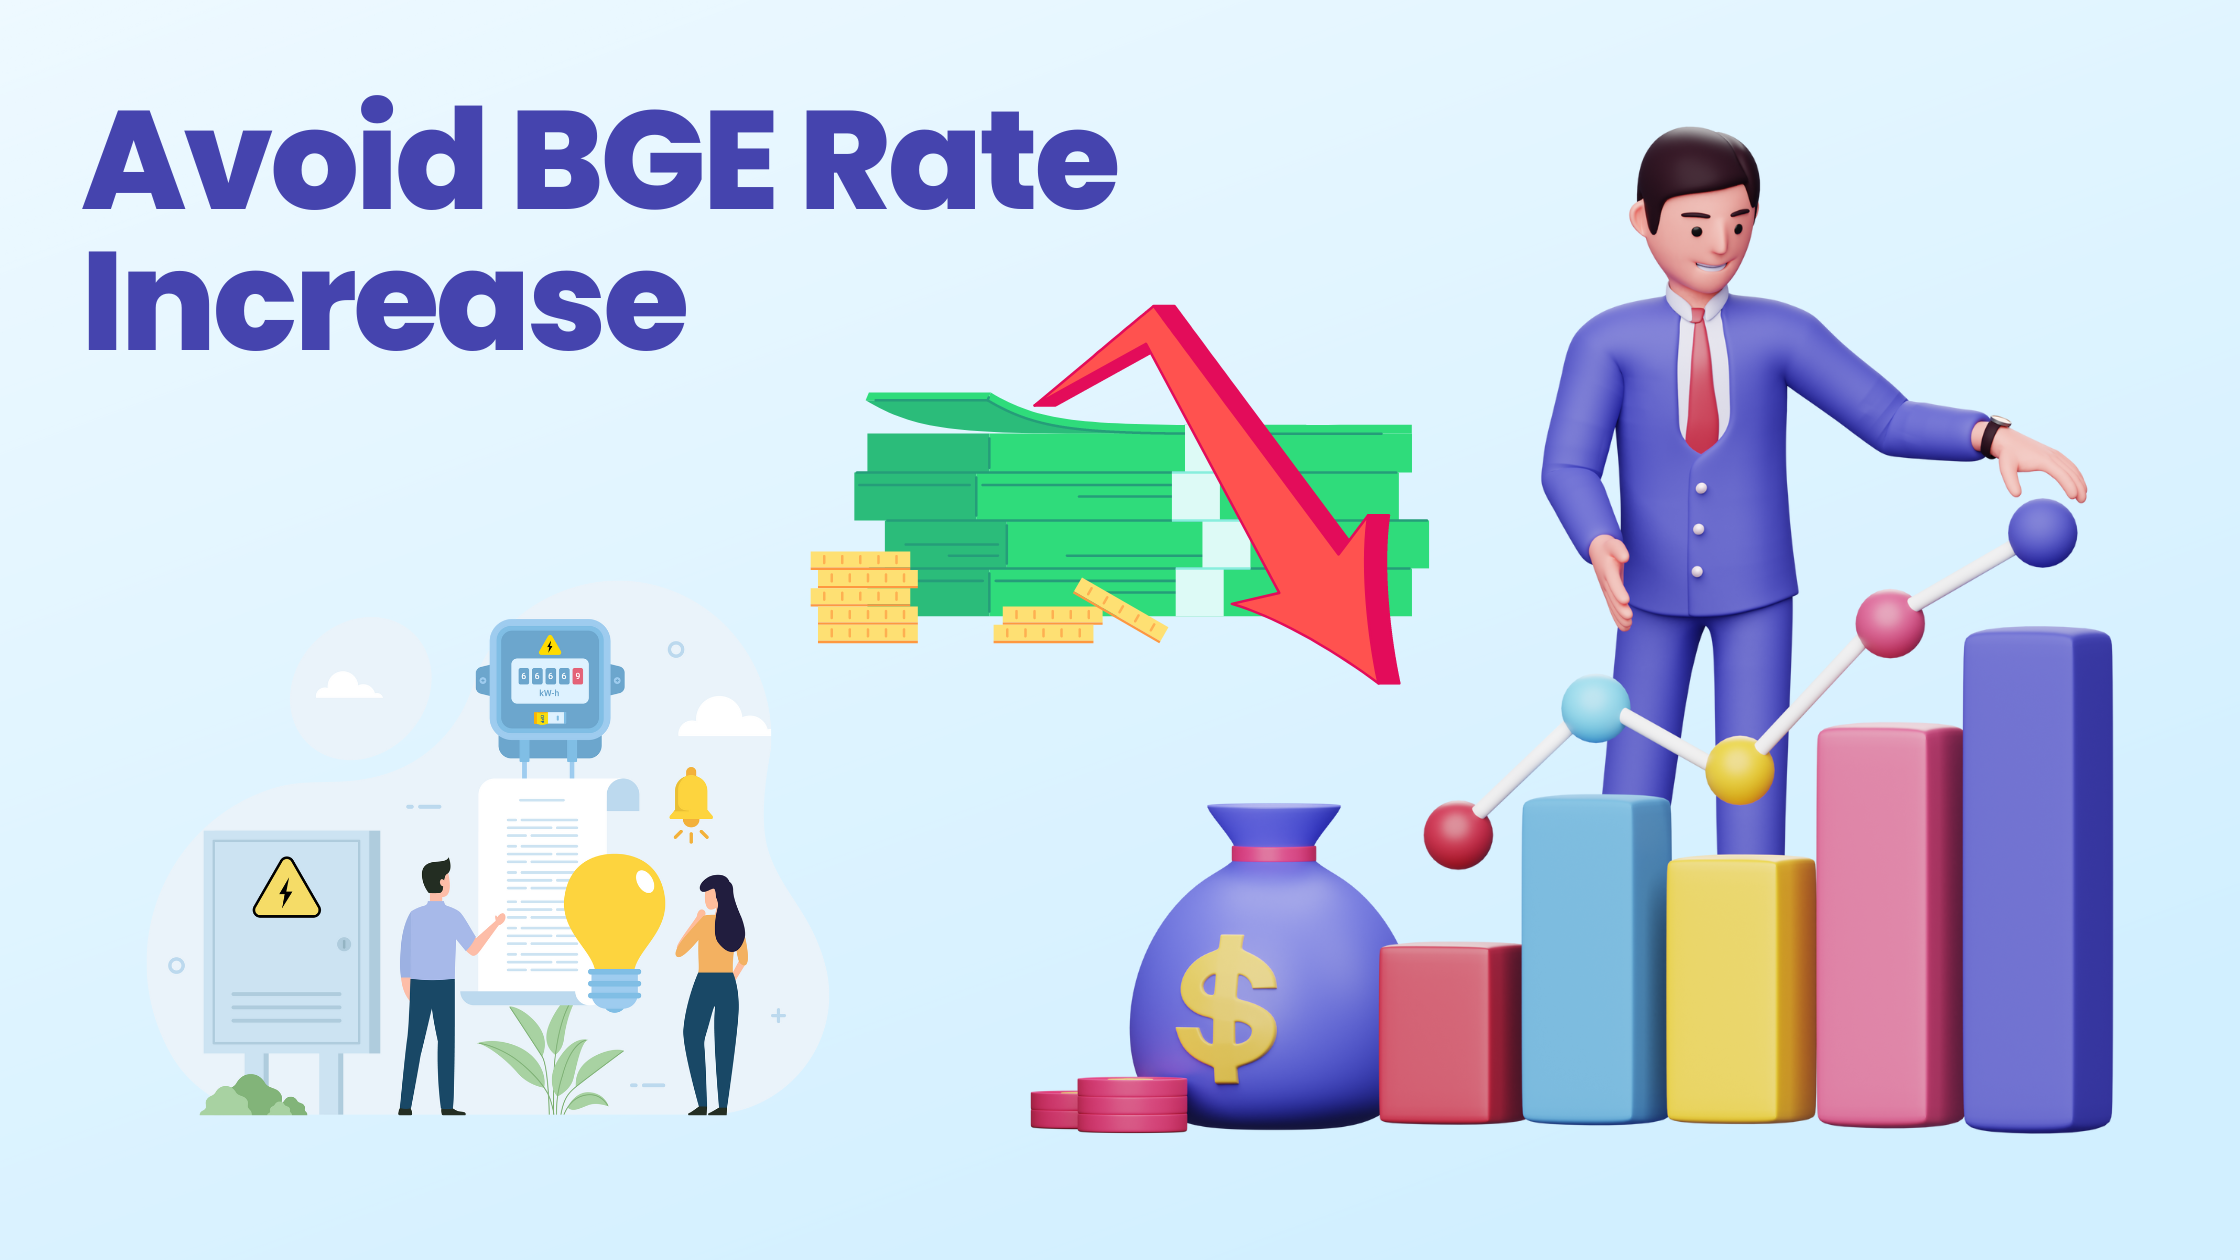 save money by shopping for BGE electric rates and avoid the BGE supply price increase